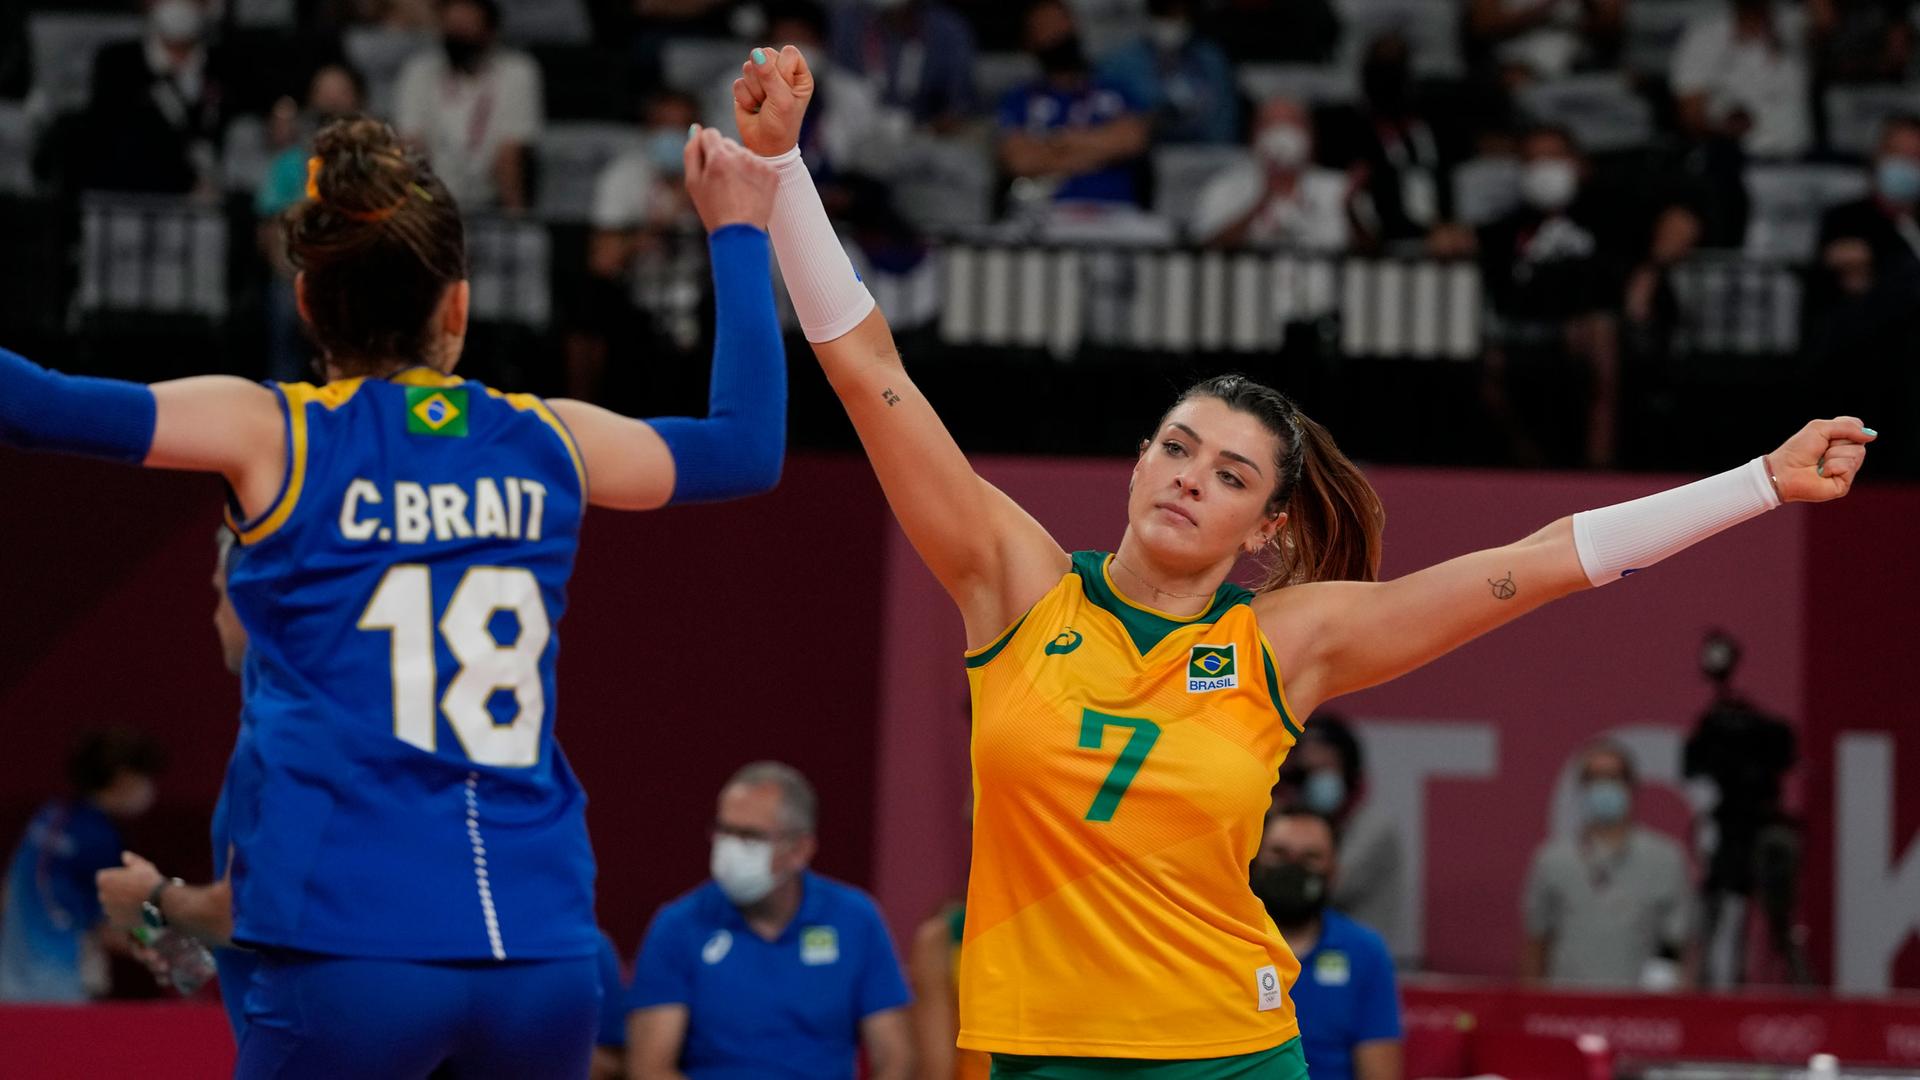 Brazil's libero Camila Brait and teammate Rosamaria Montibeller fist bump during a women's volleyball semifinal match against South Korea, at the 2020 Summer Olympics, Friday, Aug. 6, 2021, in Tokyo, Japan. 